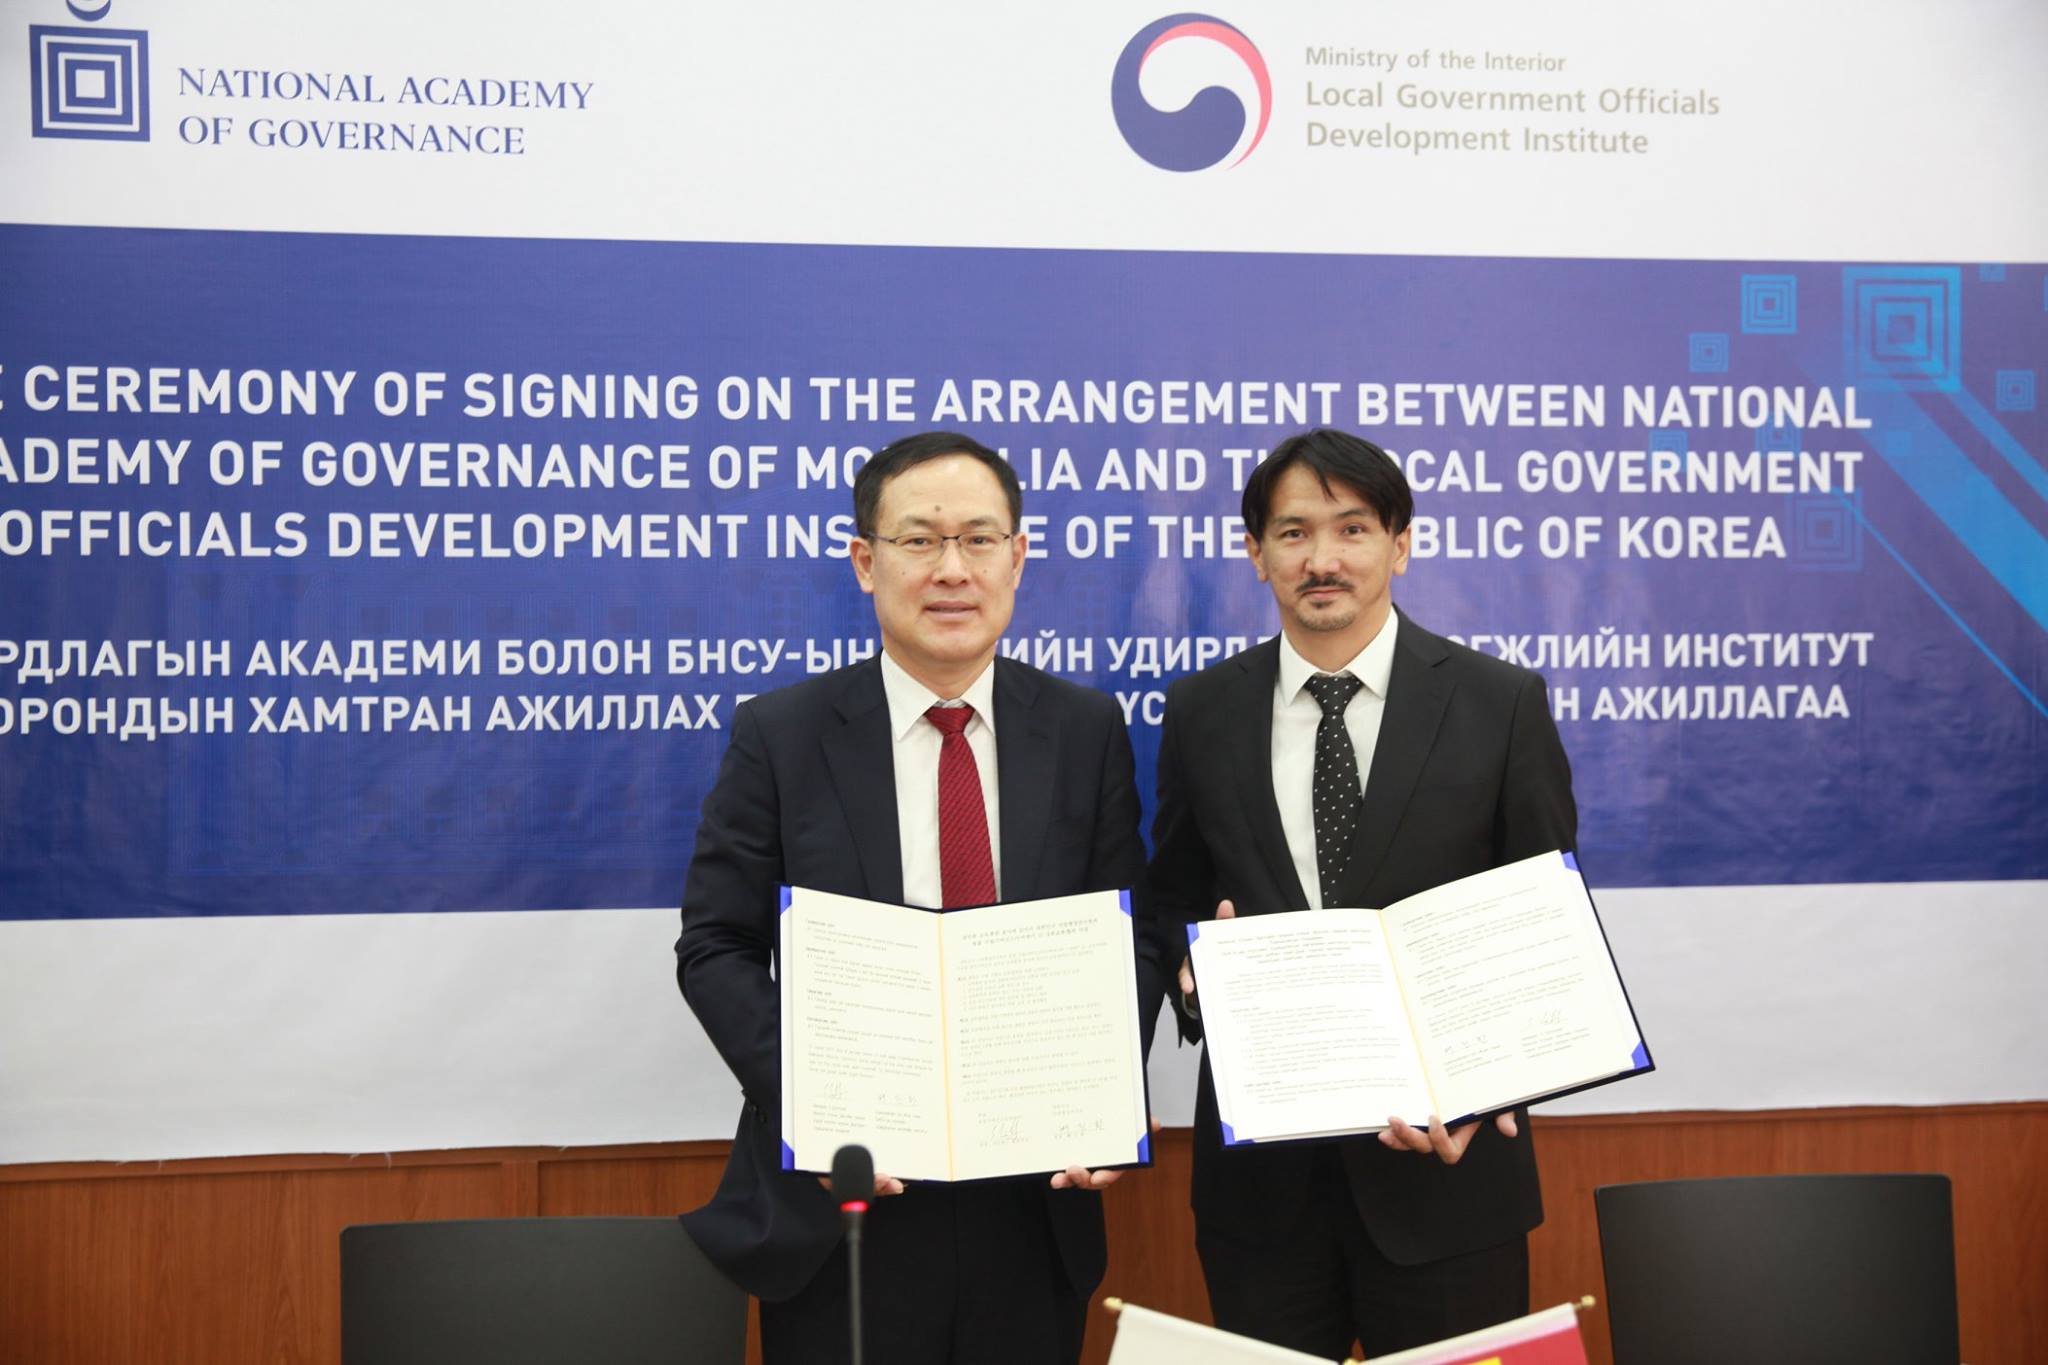 LOGODI trains on site in Mongolia, reaffirms ties with NAOG